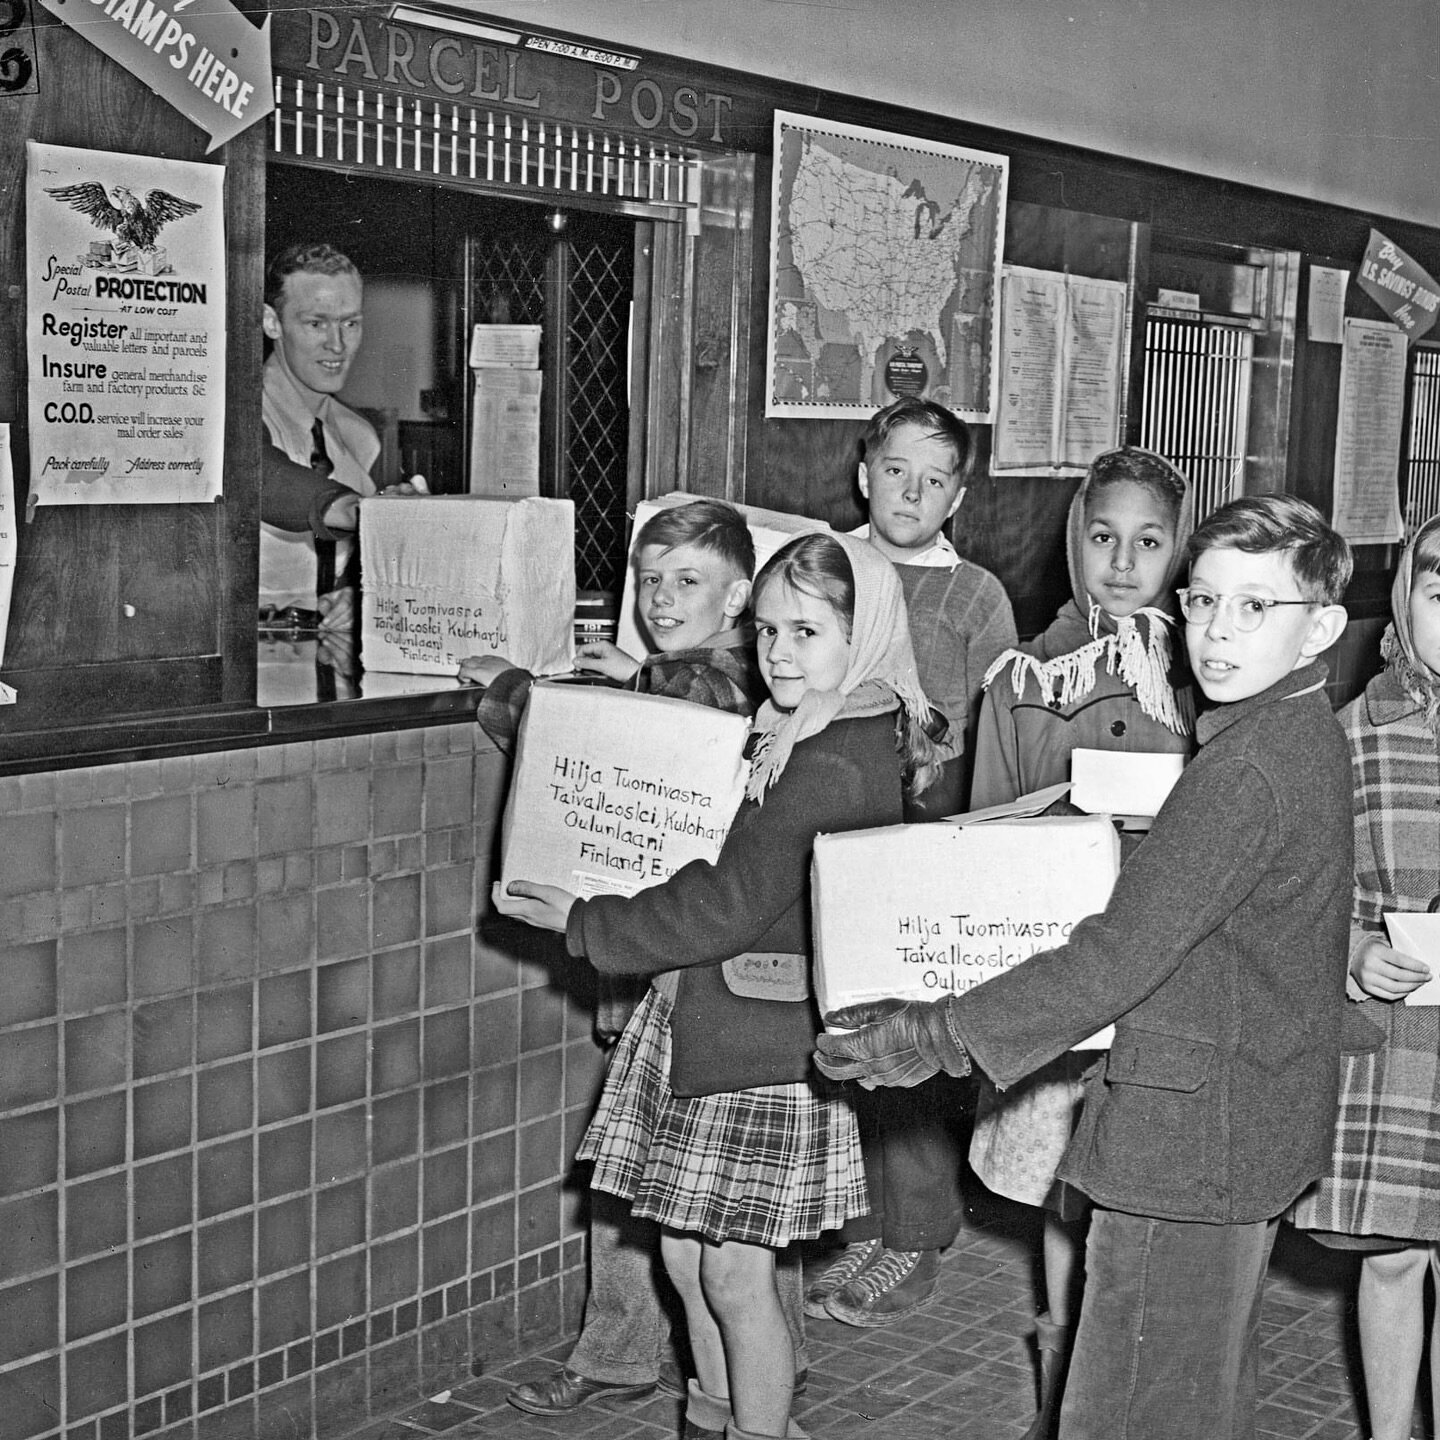 1947 - Local kids take packages to the Delhi Post Office. The packages contained items to help the people of Finland. We also have desks available. Stay warm folks.